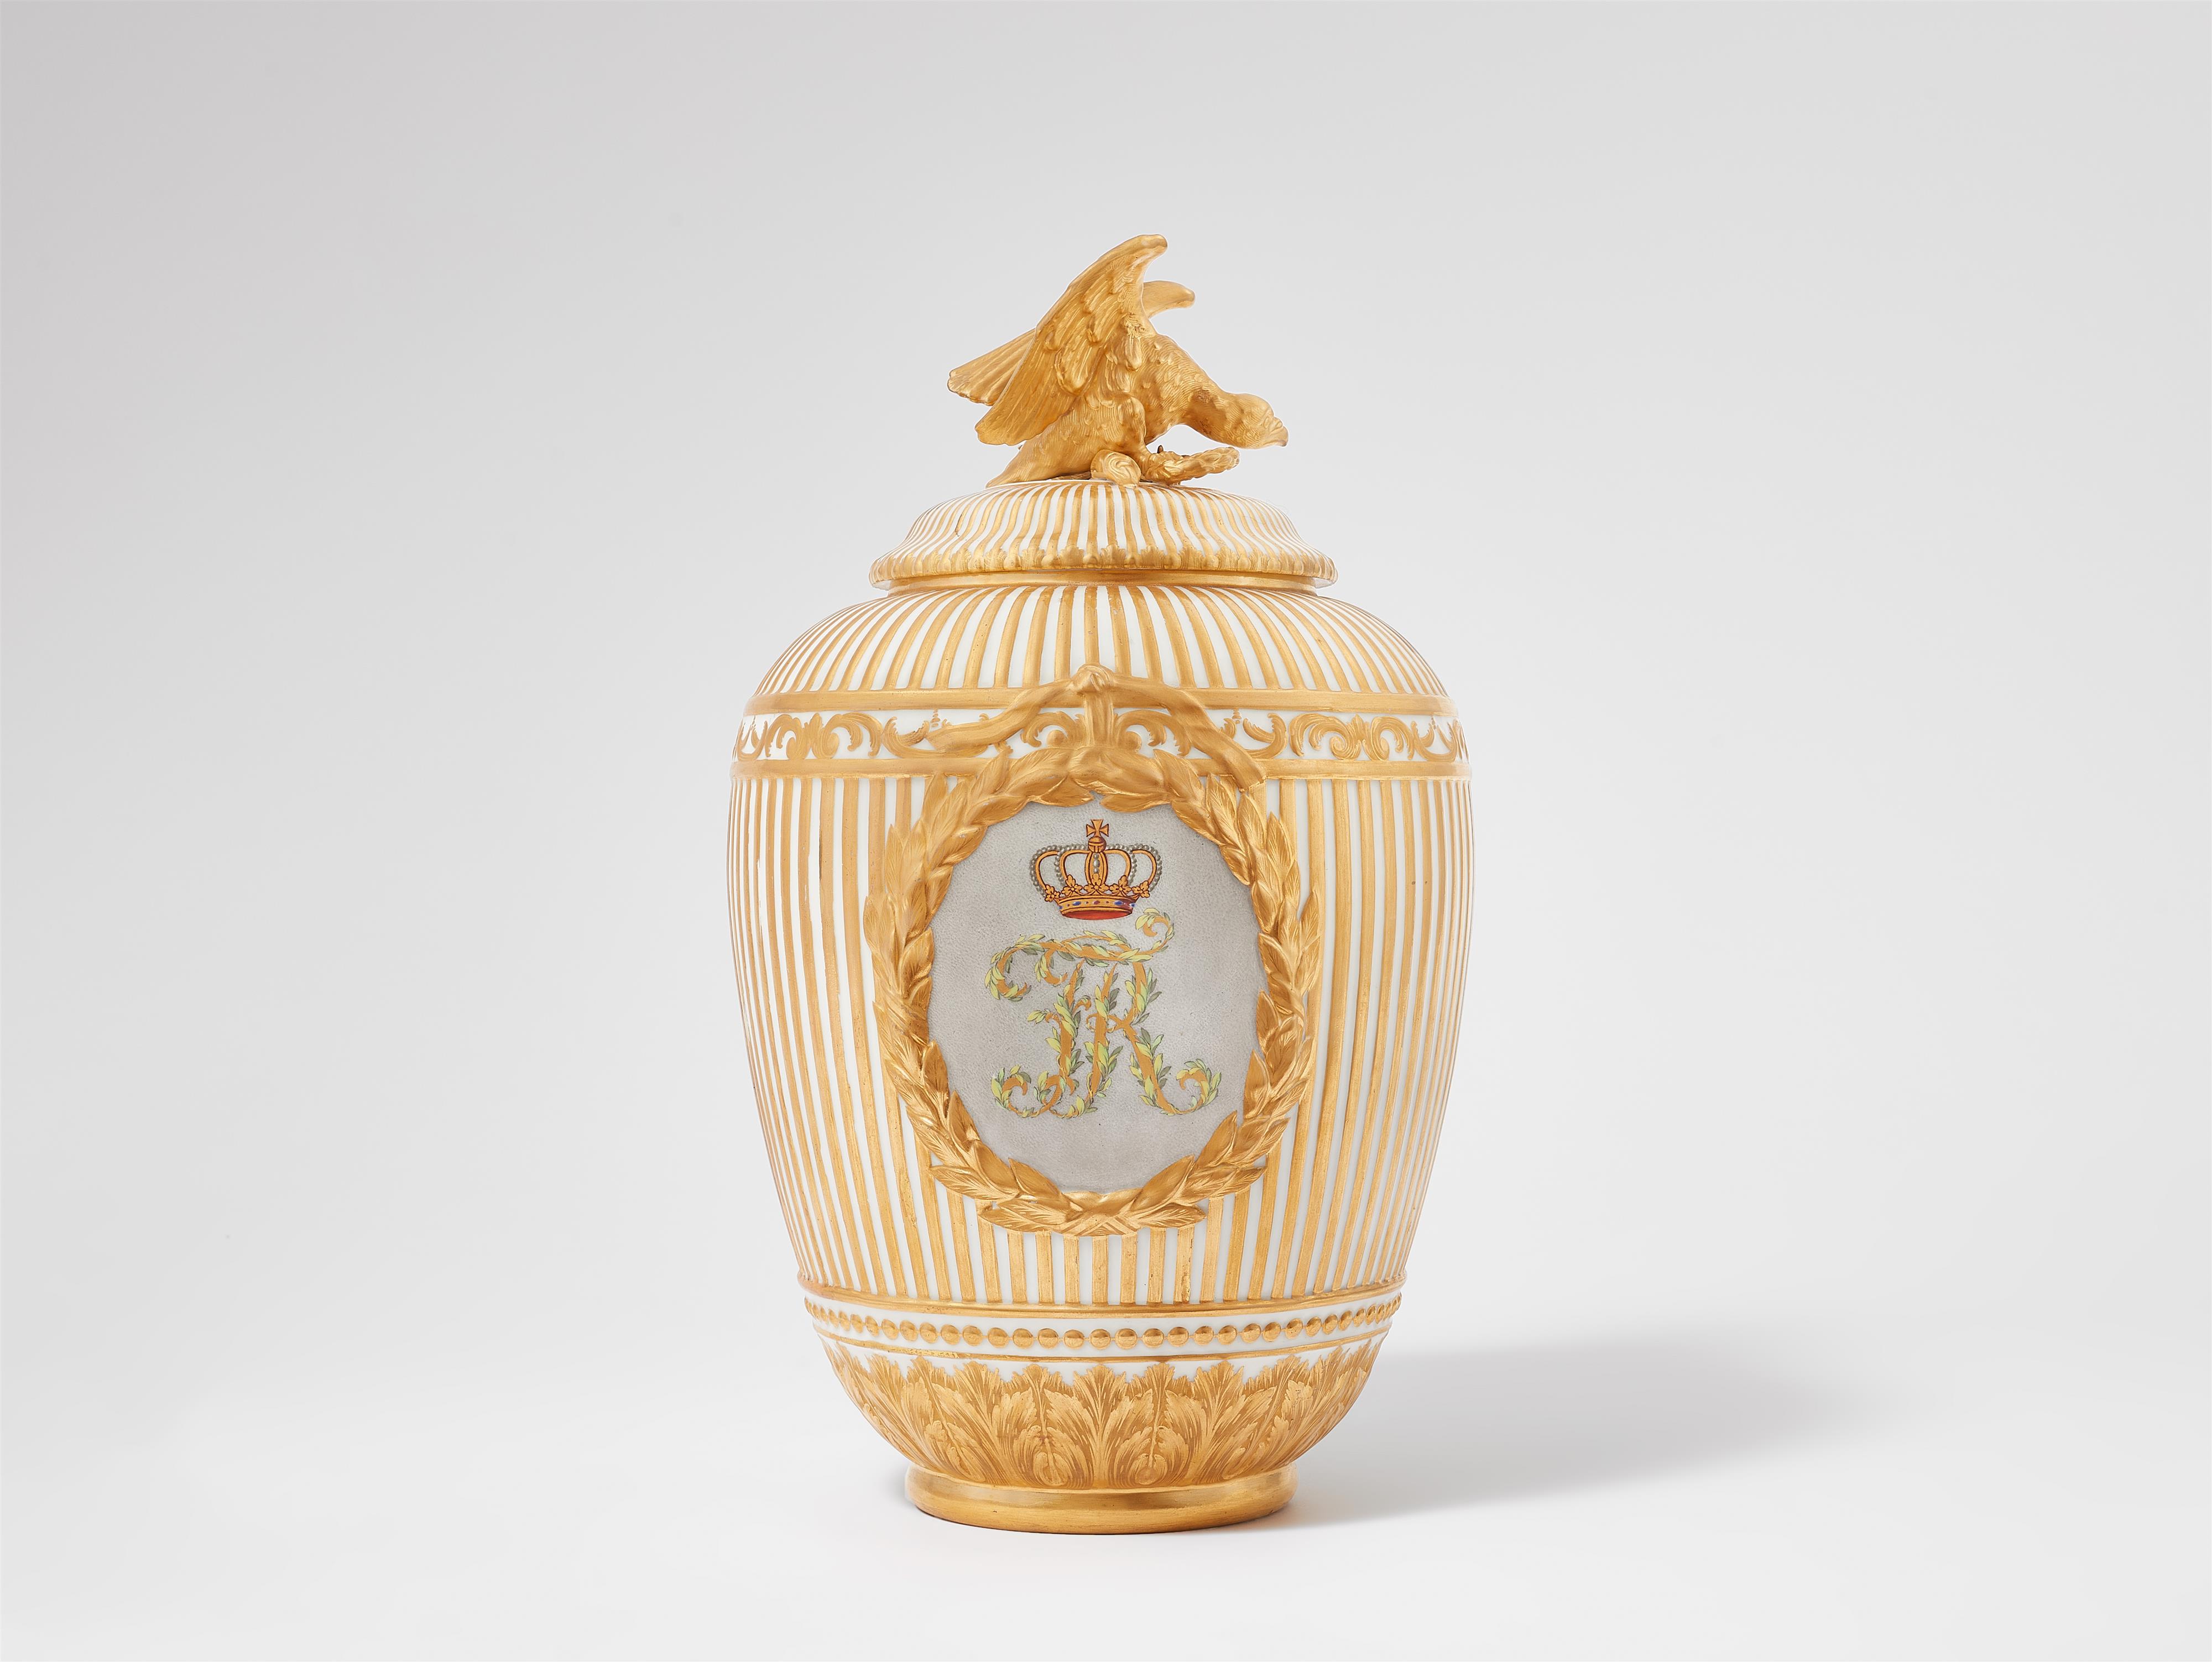 A Berlin KPM porcelain vase and cover with a portrait of King Frederick II from the possession of the House of Hannover - image-2